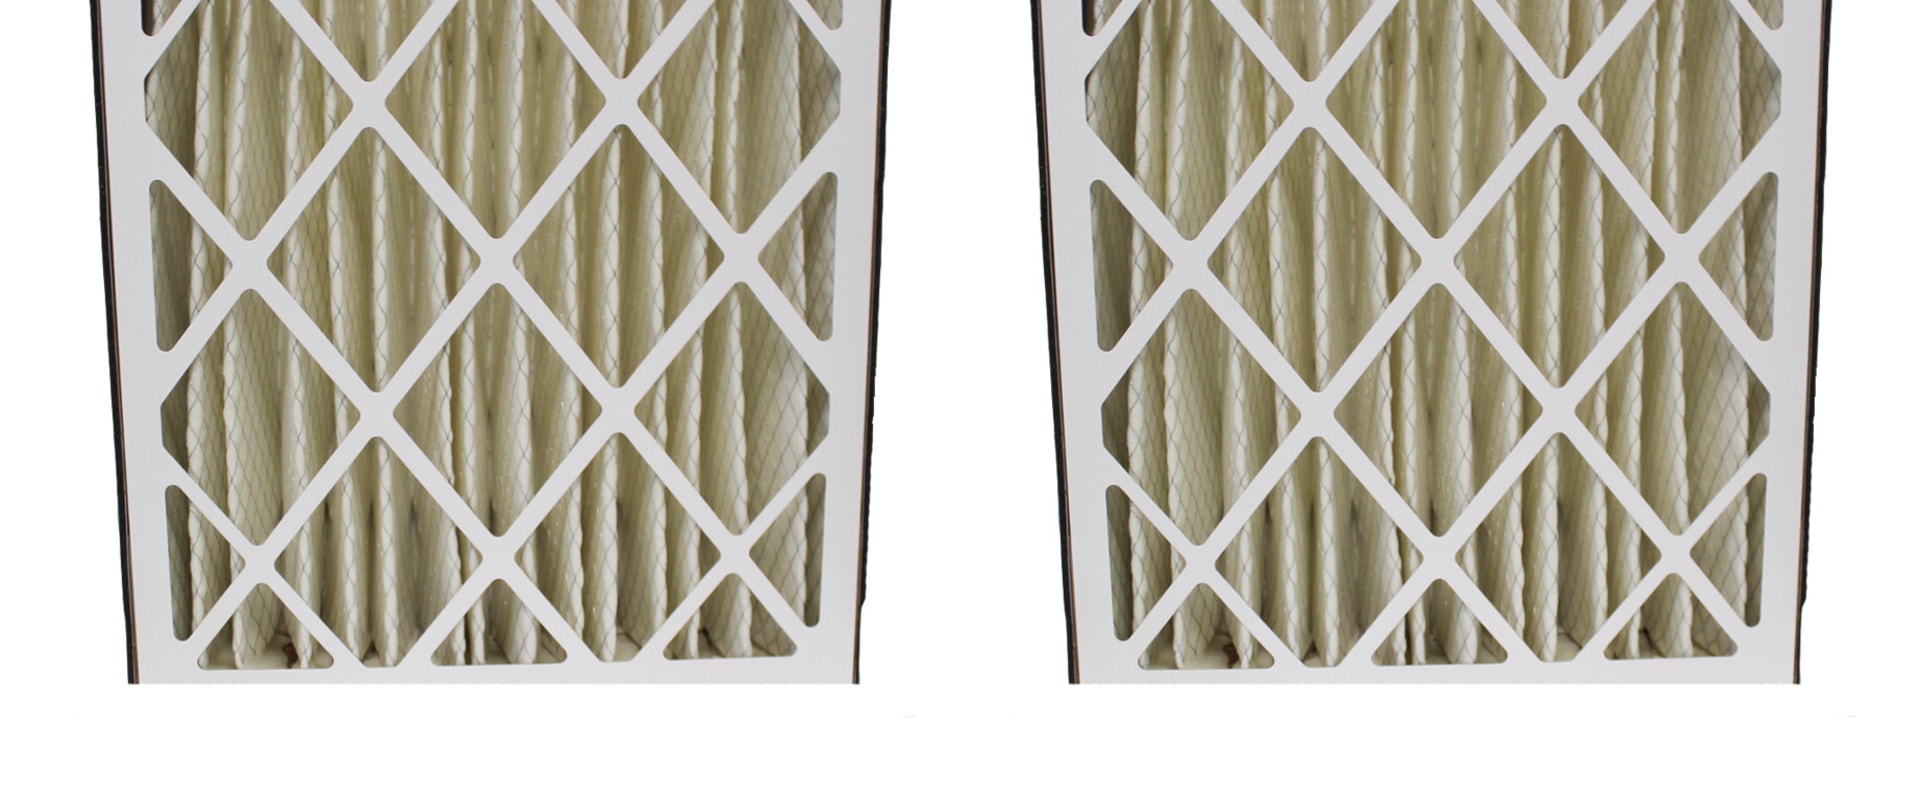 Merv 11 Air Filters 20x25x5: Improve Your Home's Air Quality